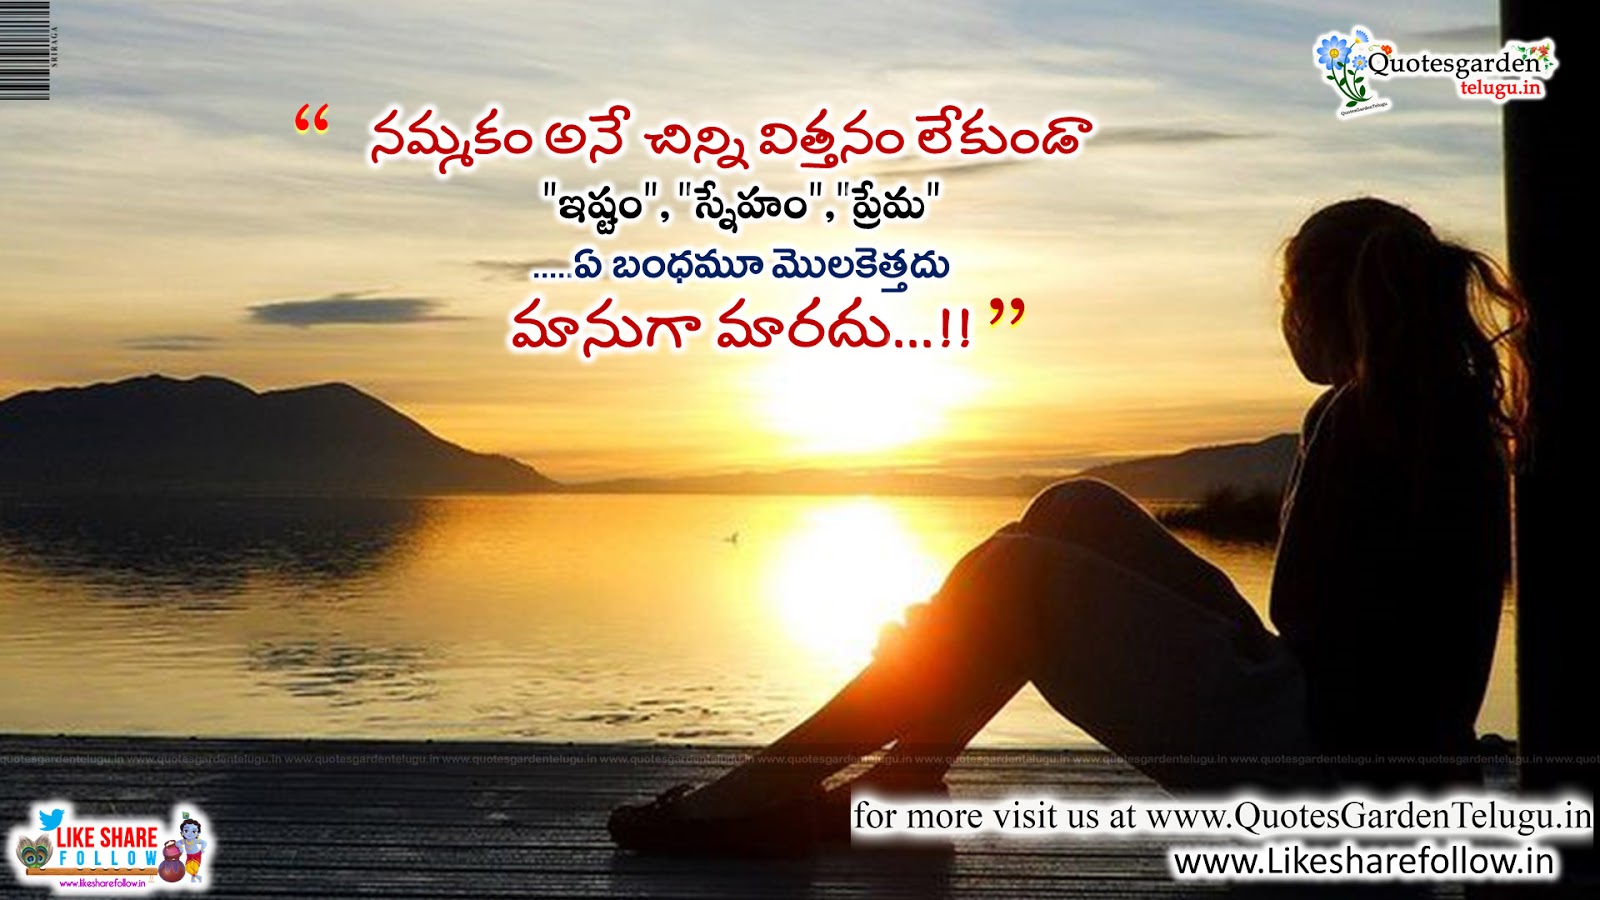 Telugu Love Quotes Wallpapers Free Download Site Title